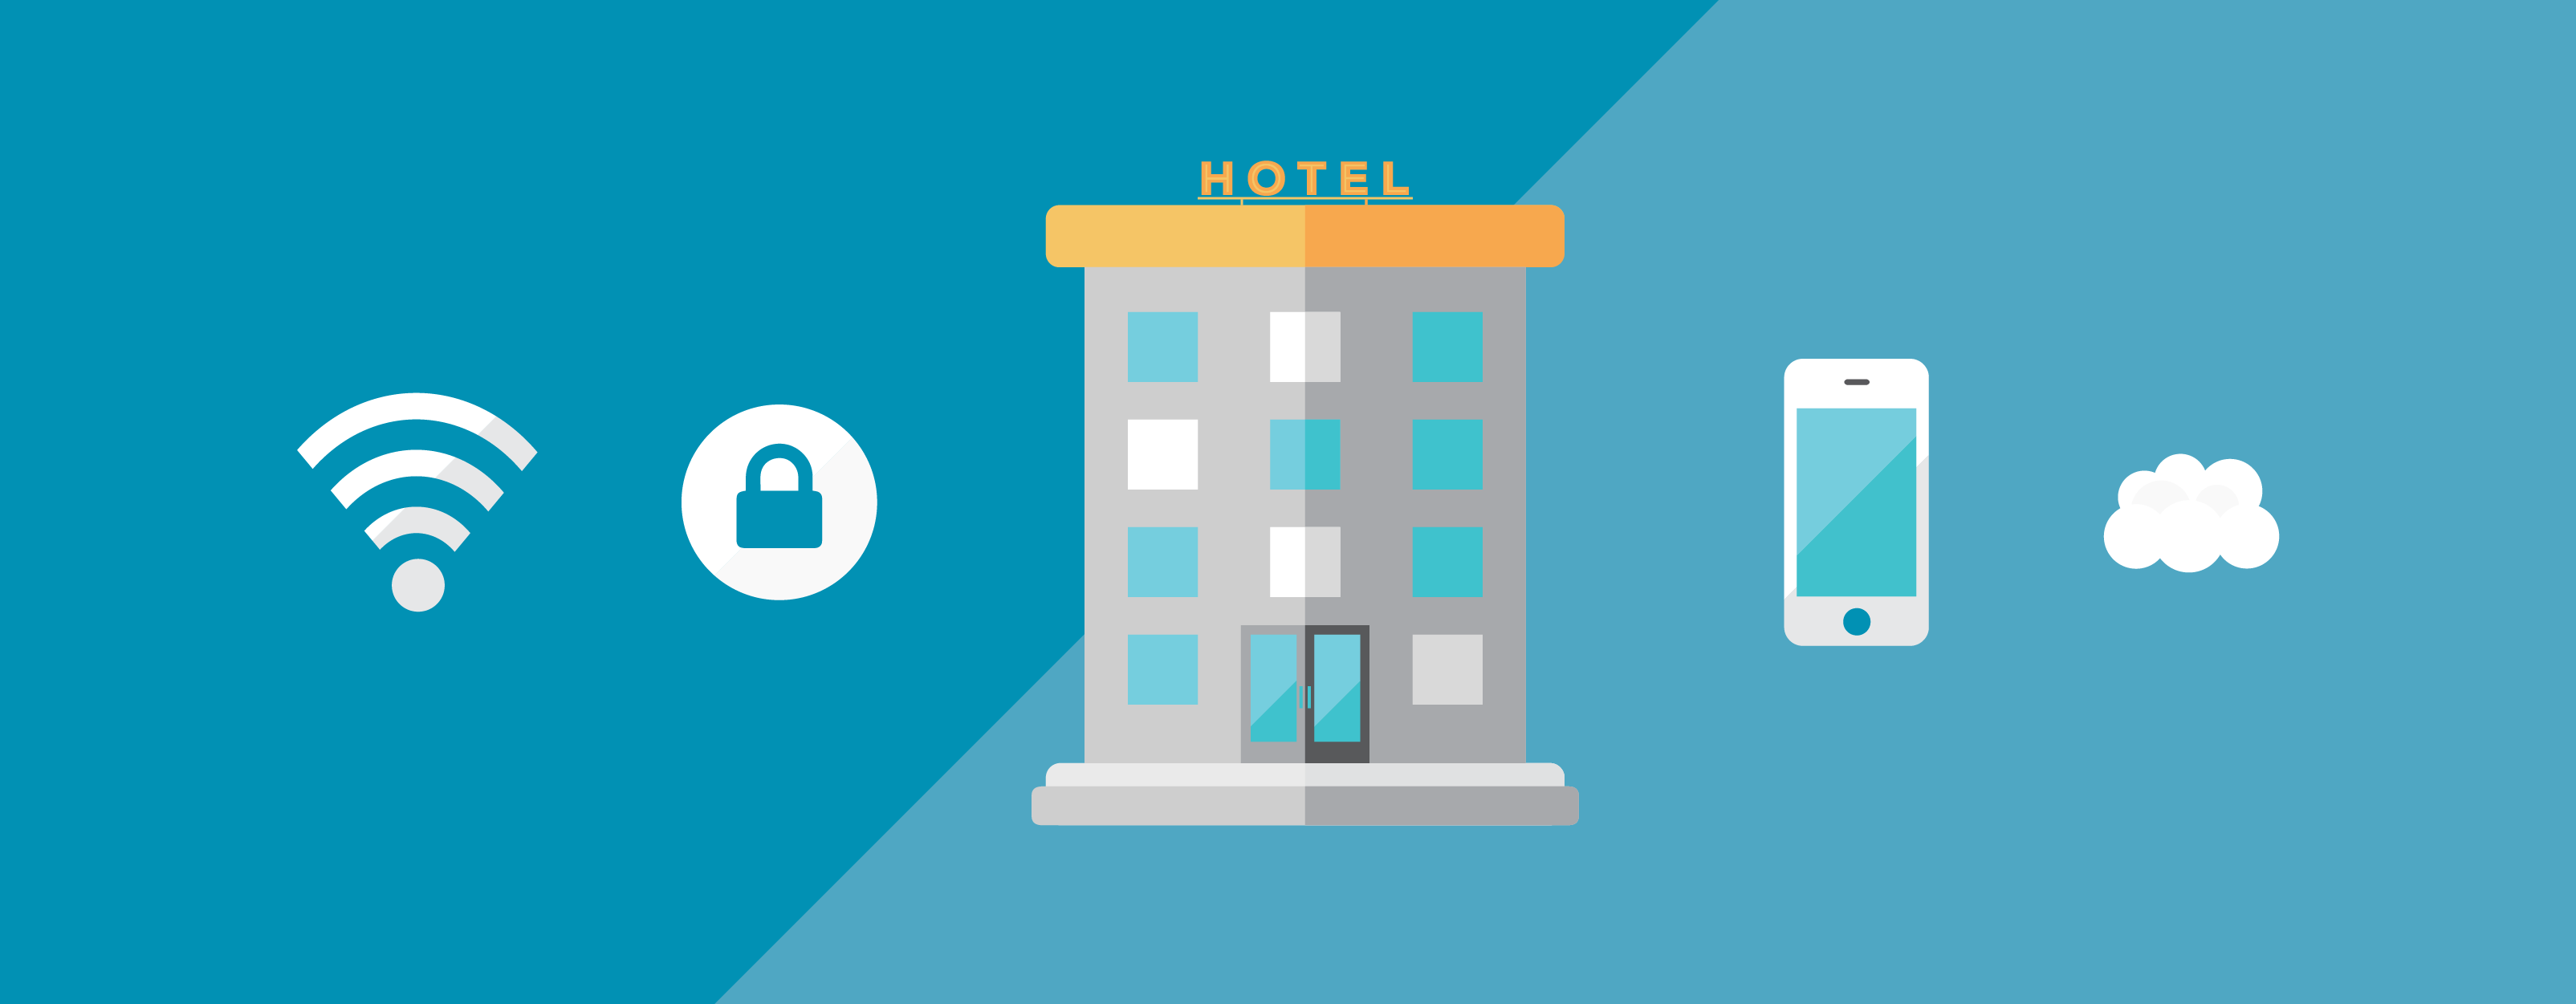 Illustrated graphic, business technology for hotels